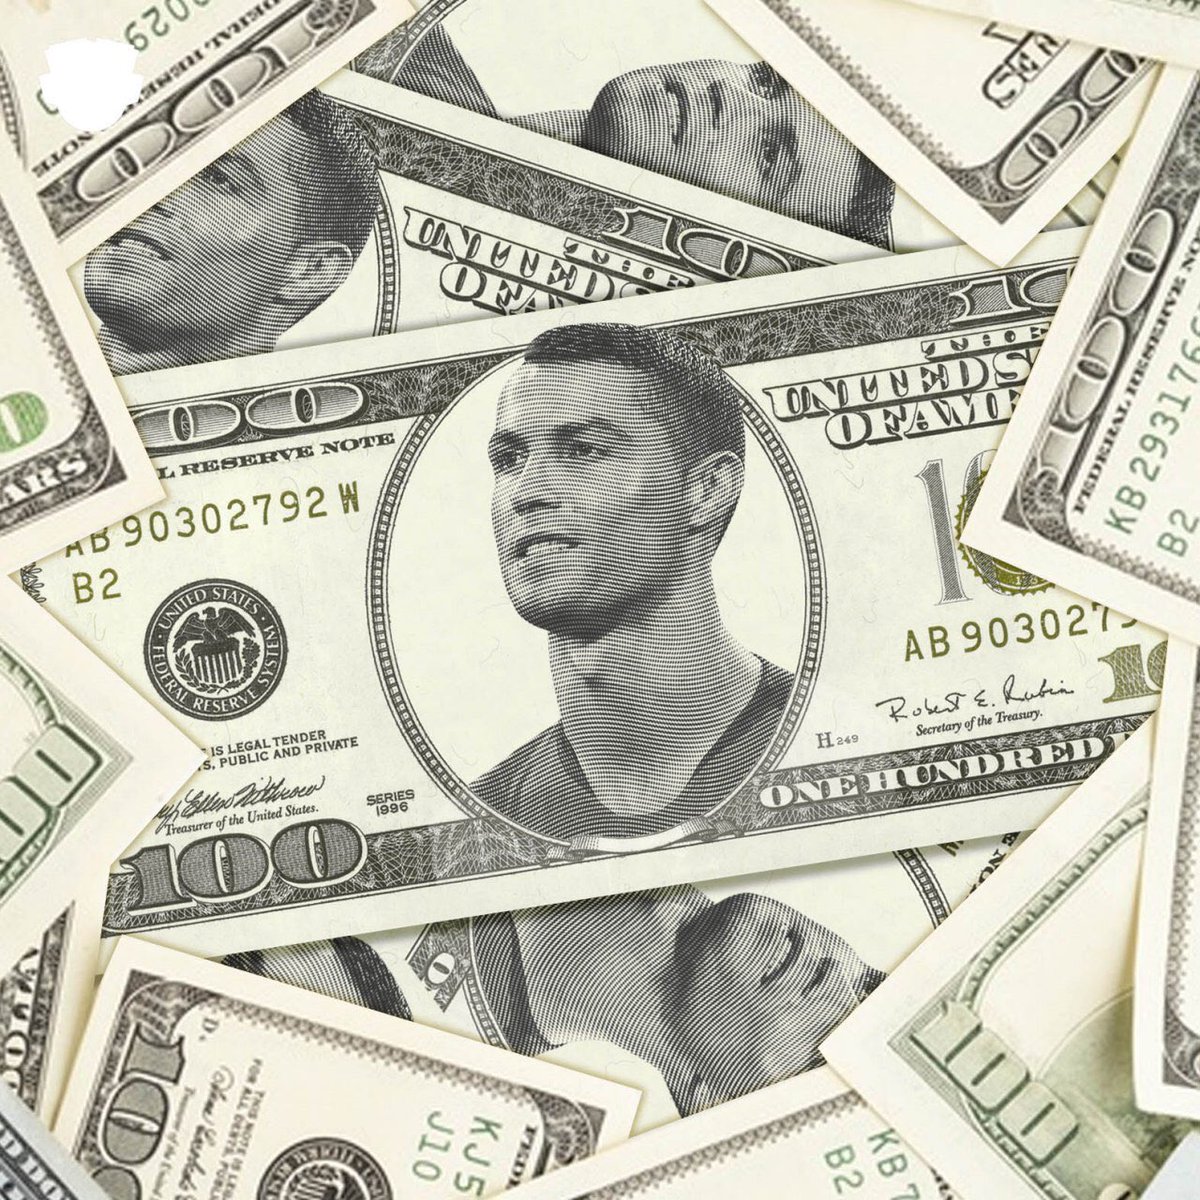 Cristiano Ronaldo has now become the first football player in history to earn more than $1 billion during his playing career [forbes]